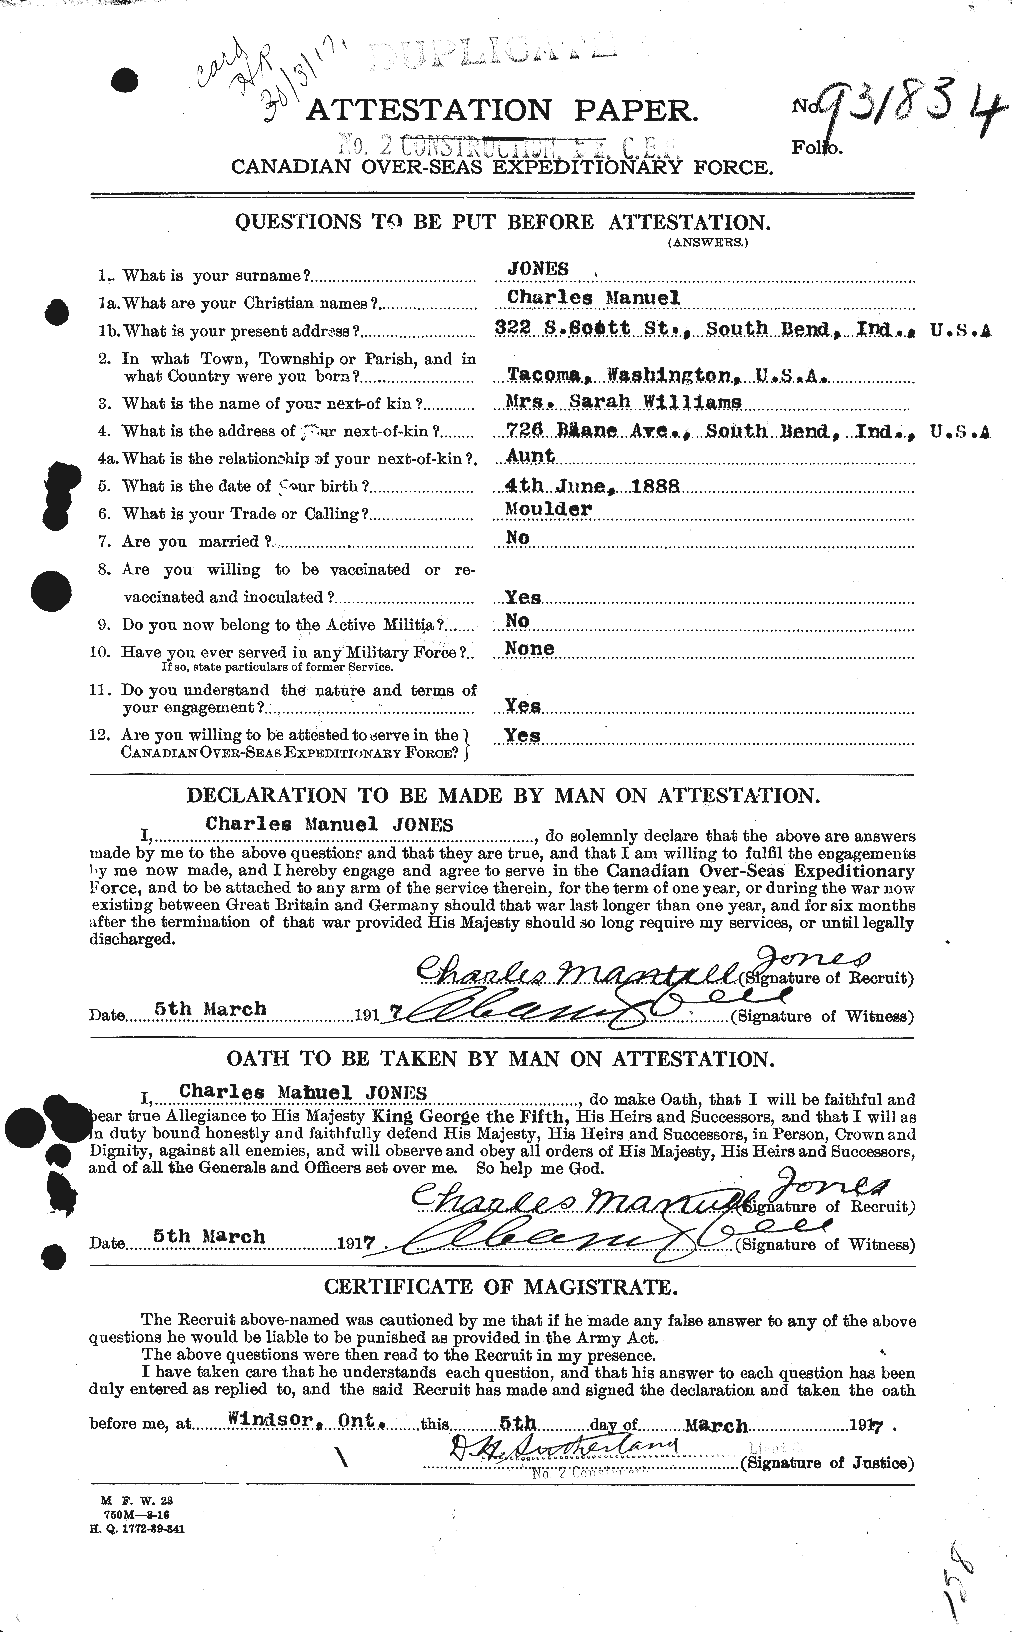 Personnel Records of the First World War - CEF 423859a